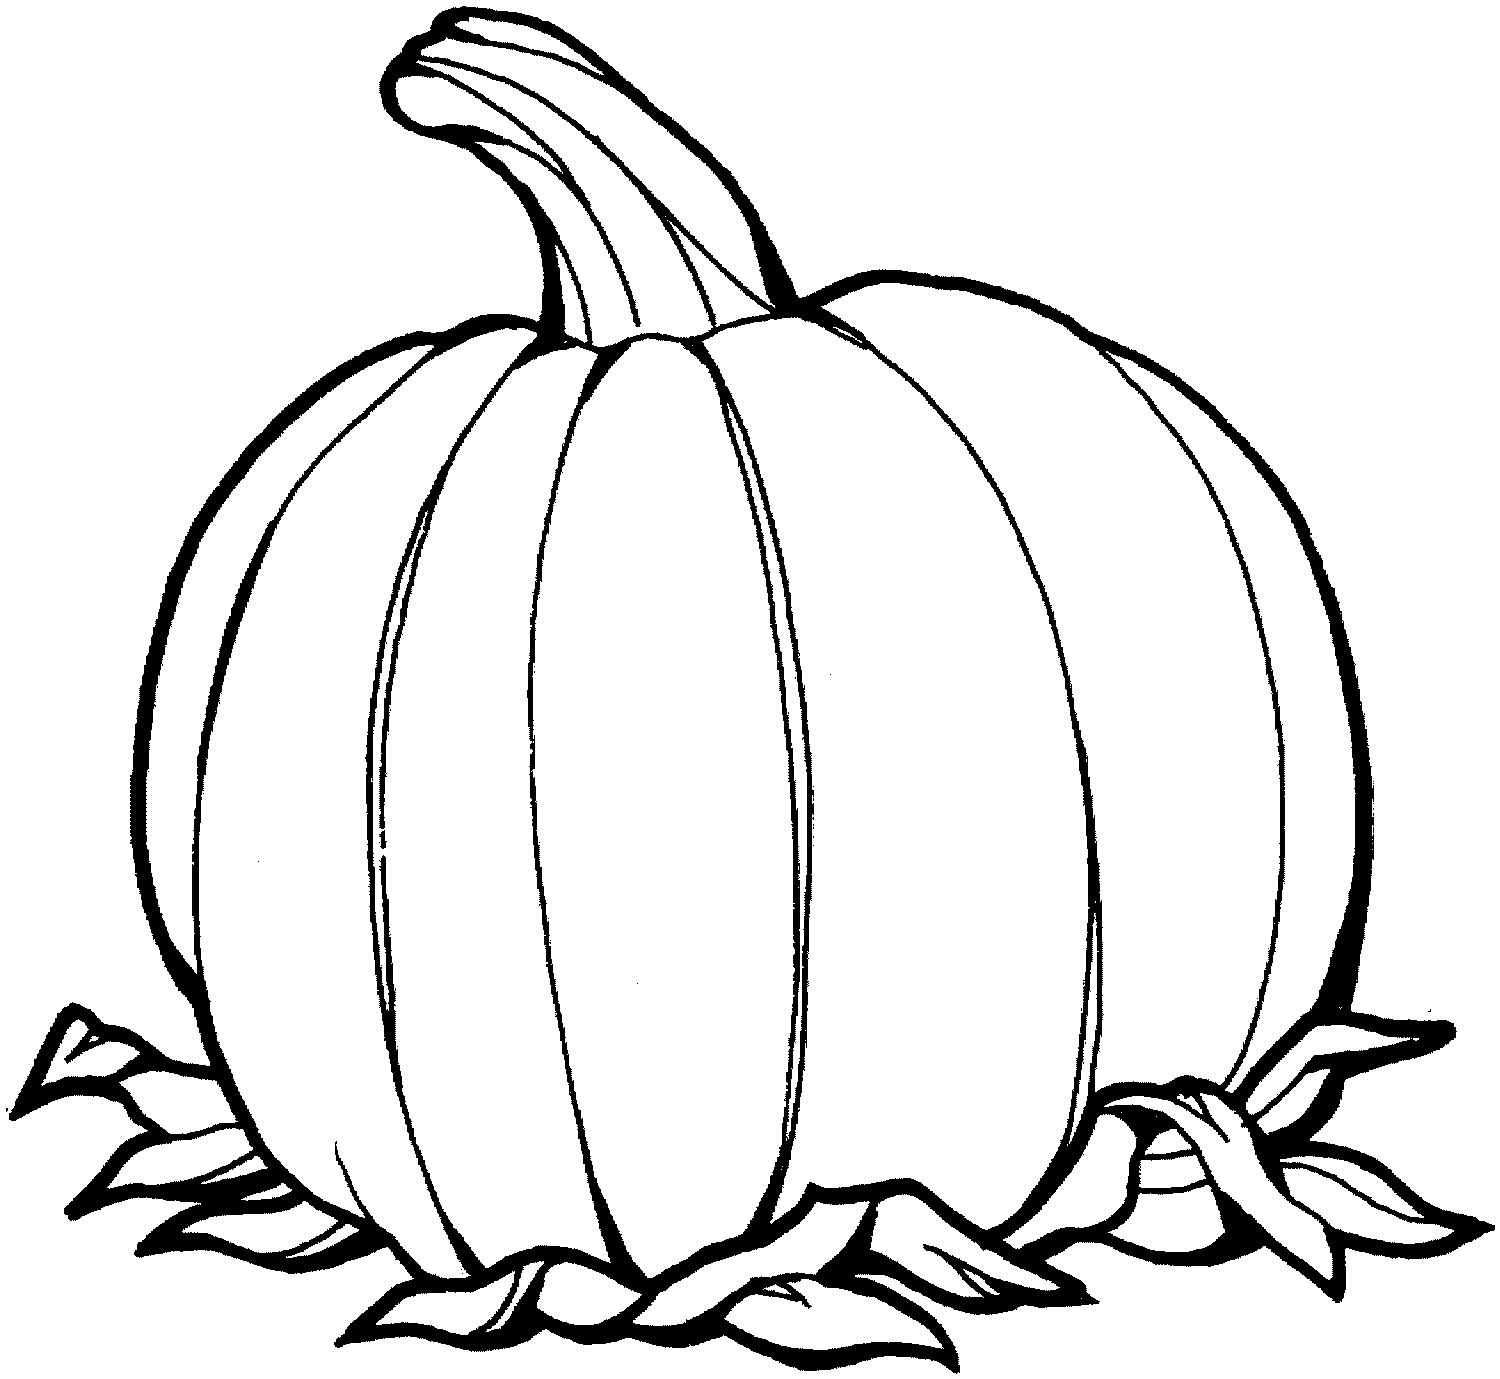 coloring pages for pumpkins free printable pumpkin coloring pages for kids pages coloring pumpkins for 